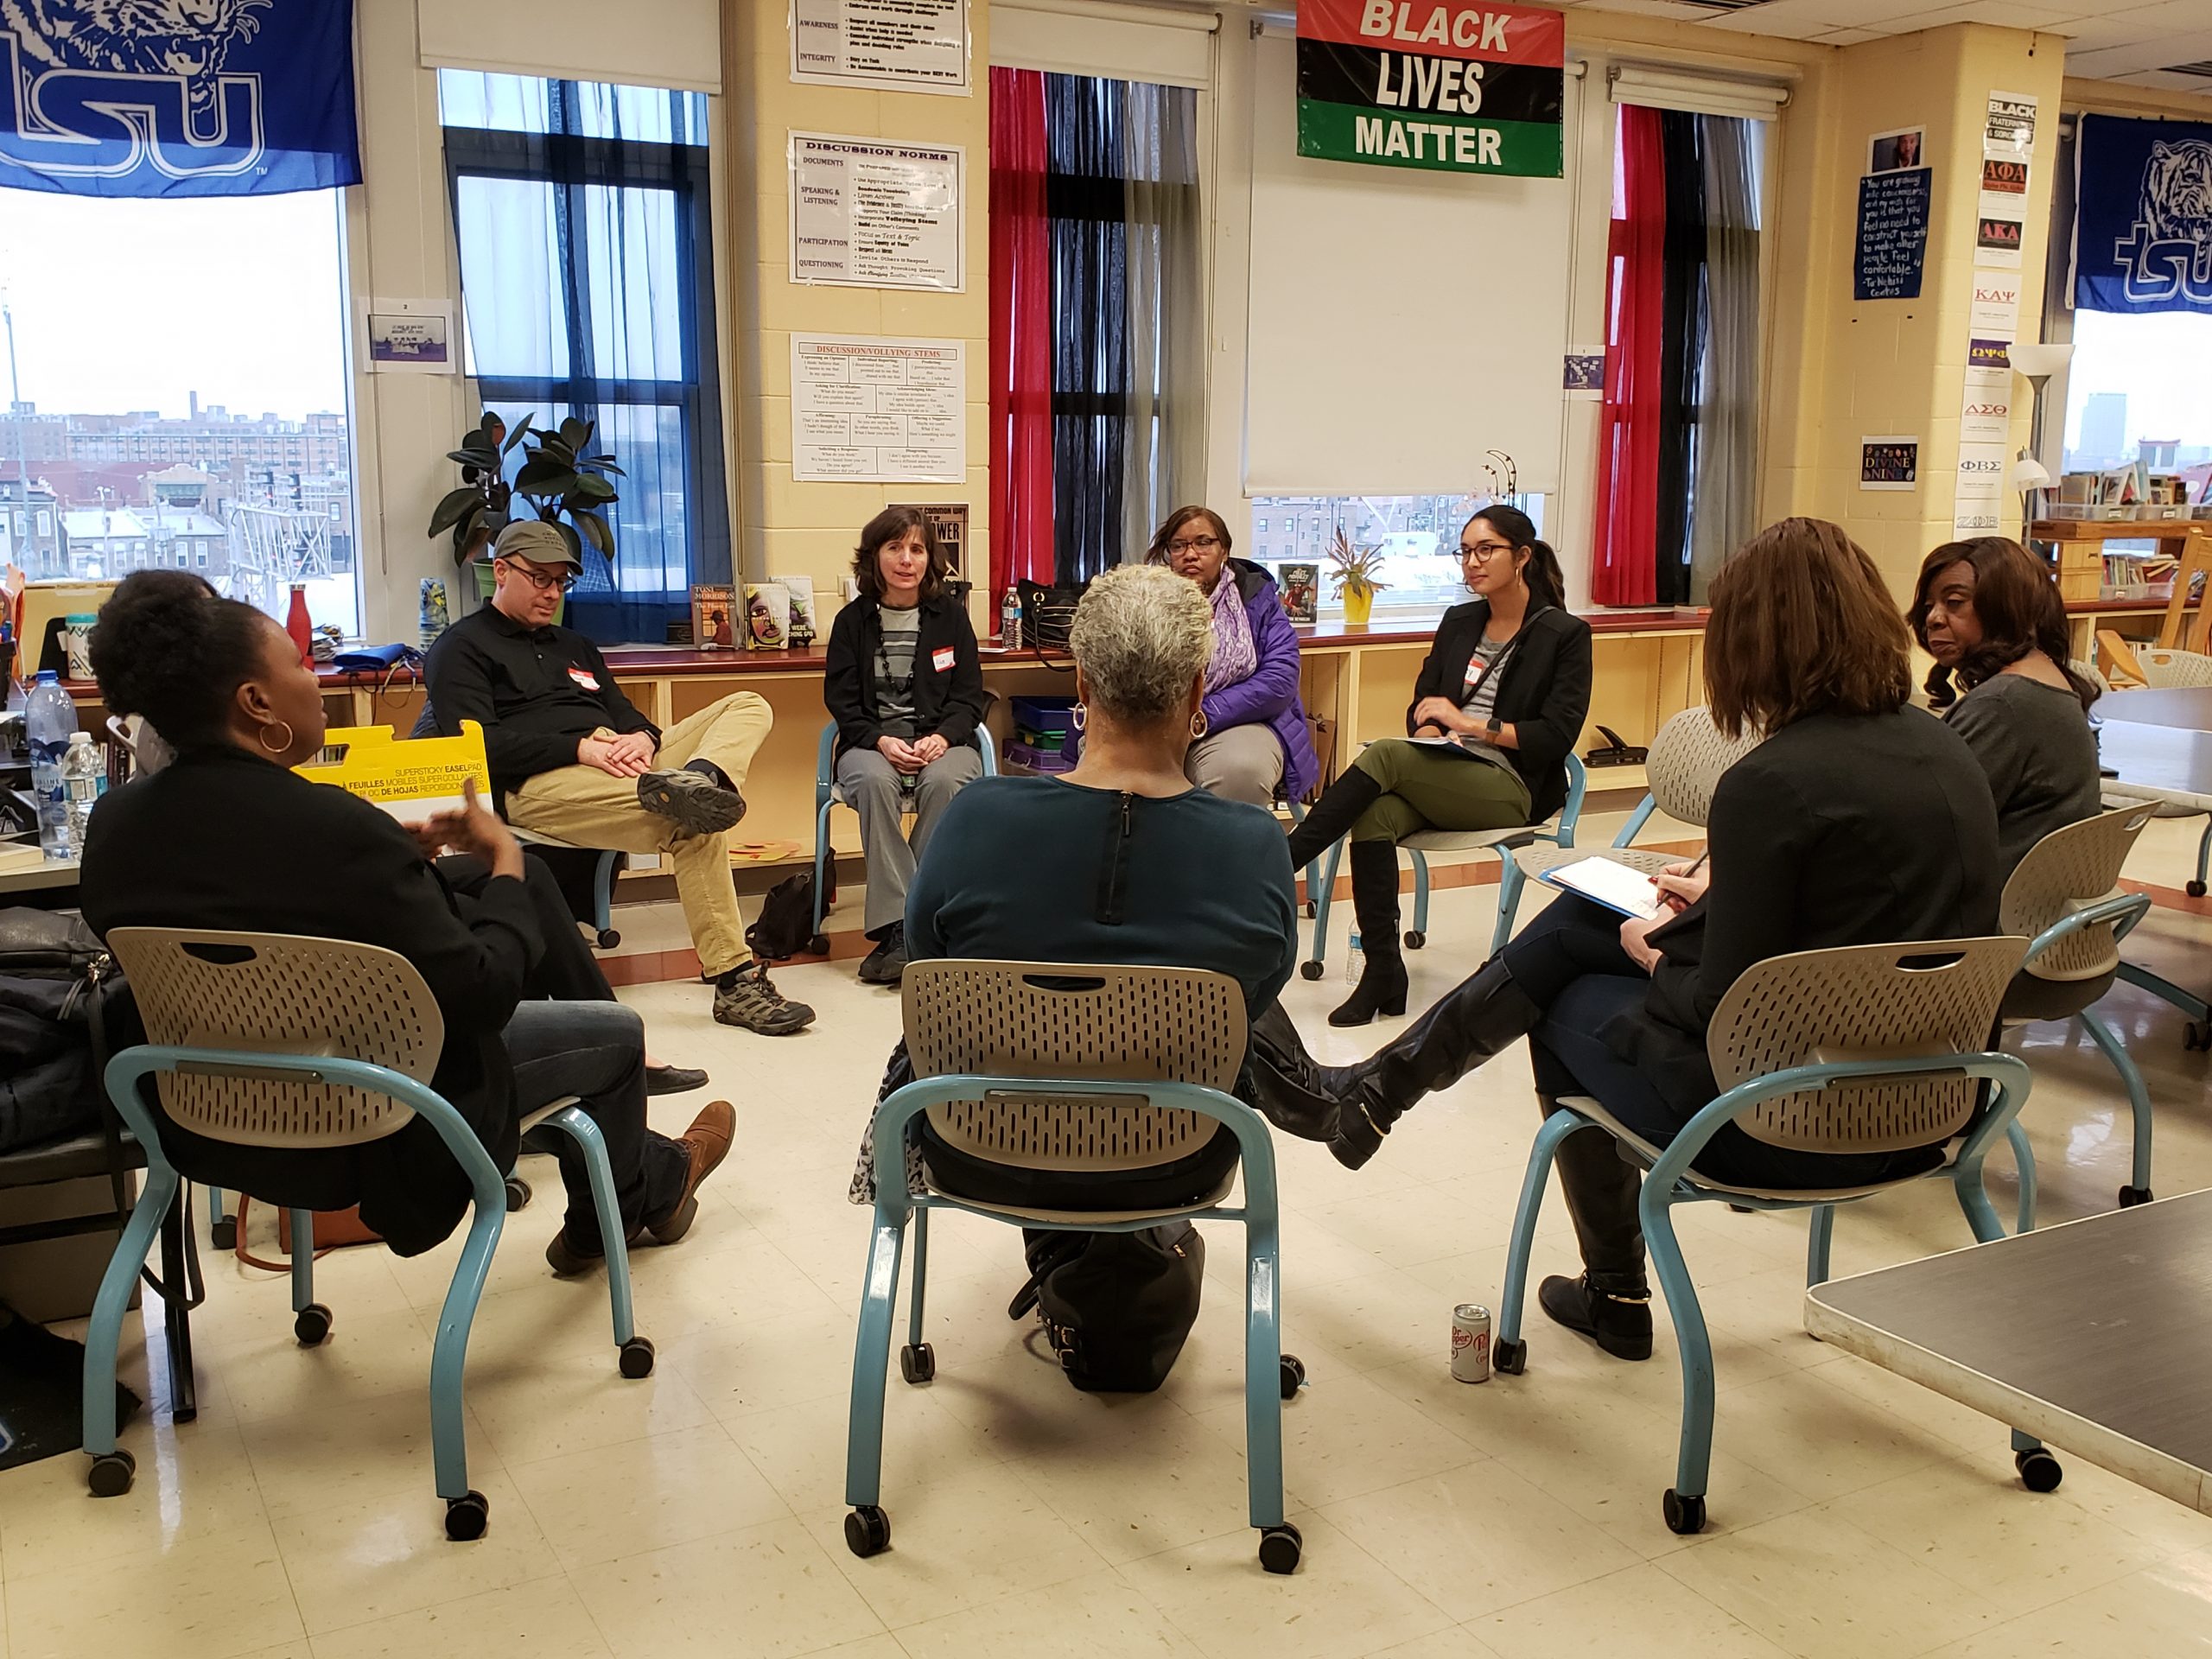 Group of adults seated in a circle in a classroom, in conversation